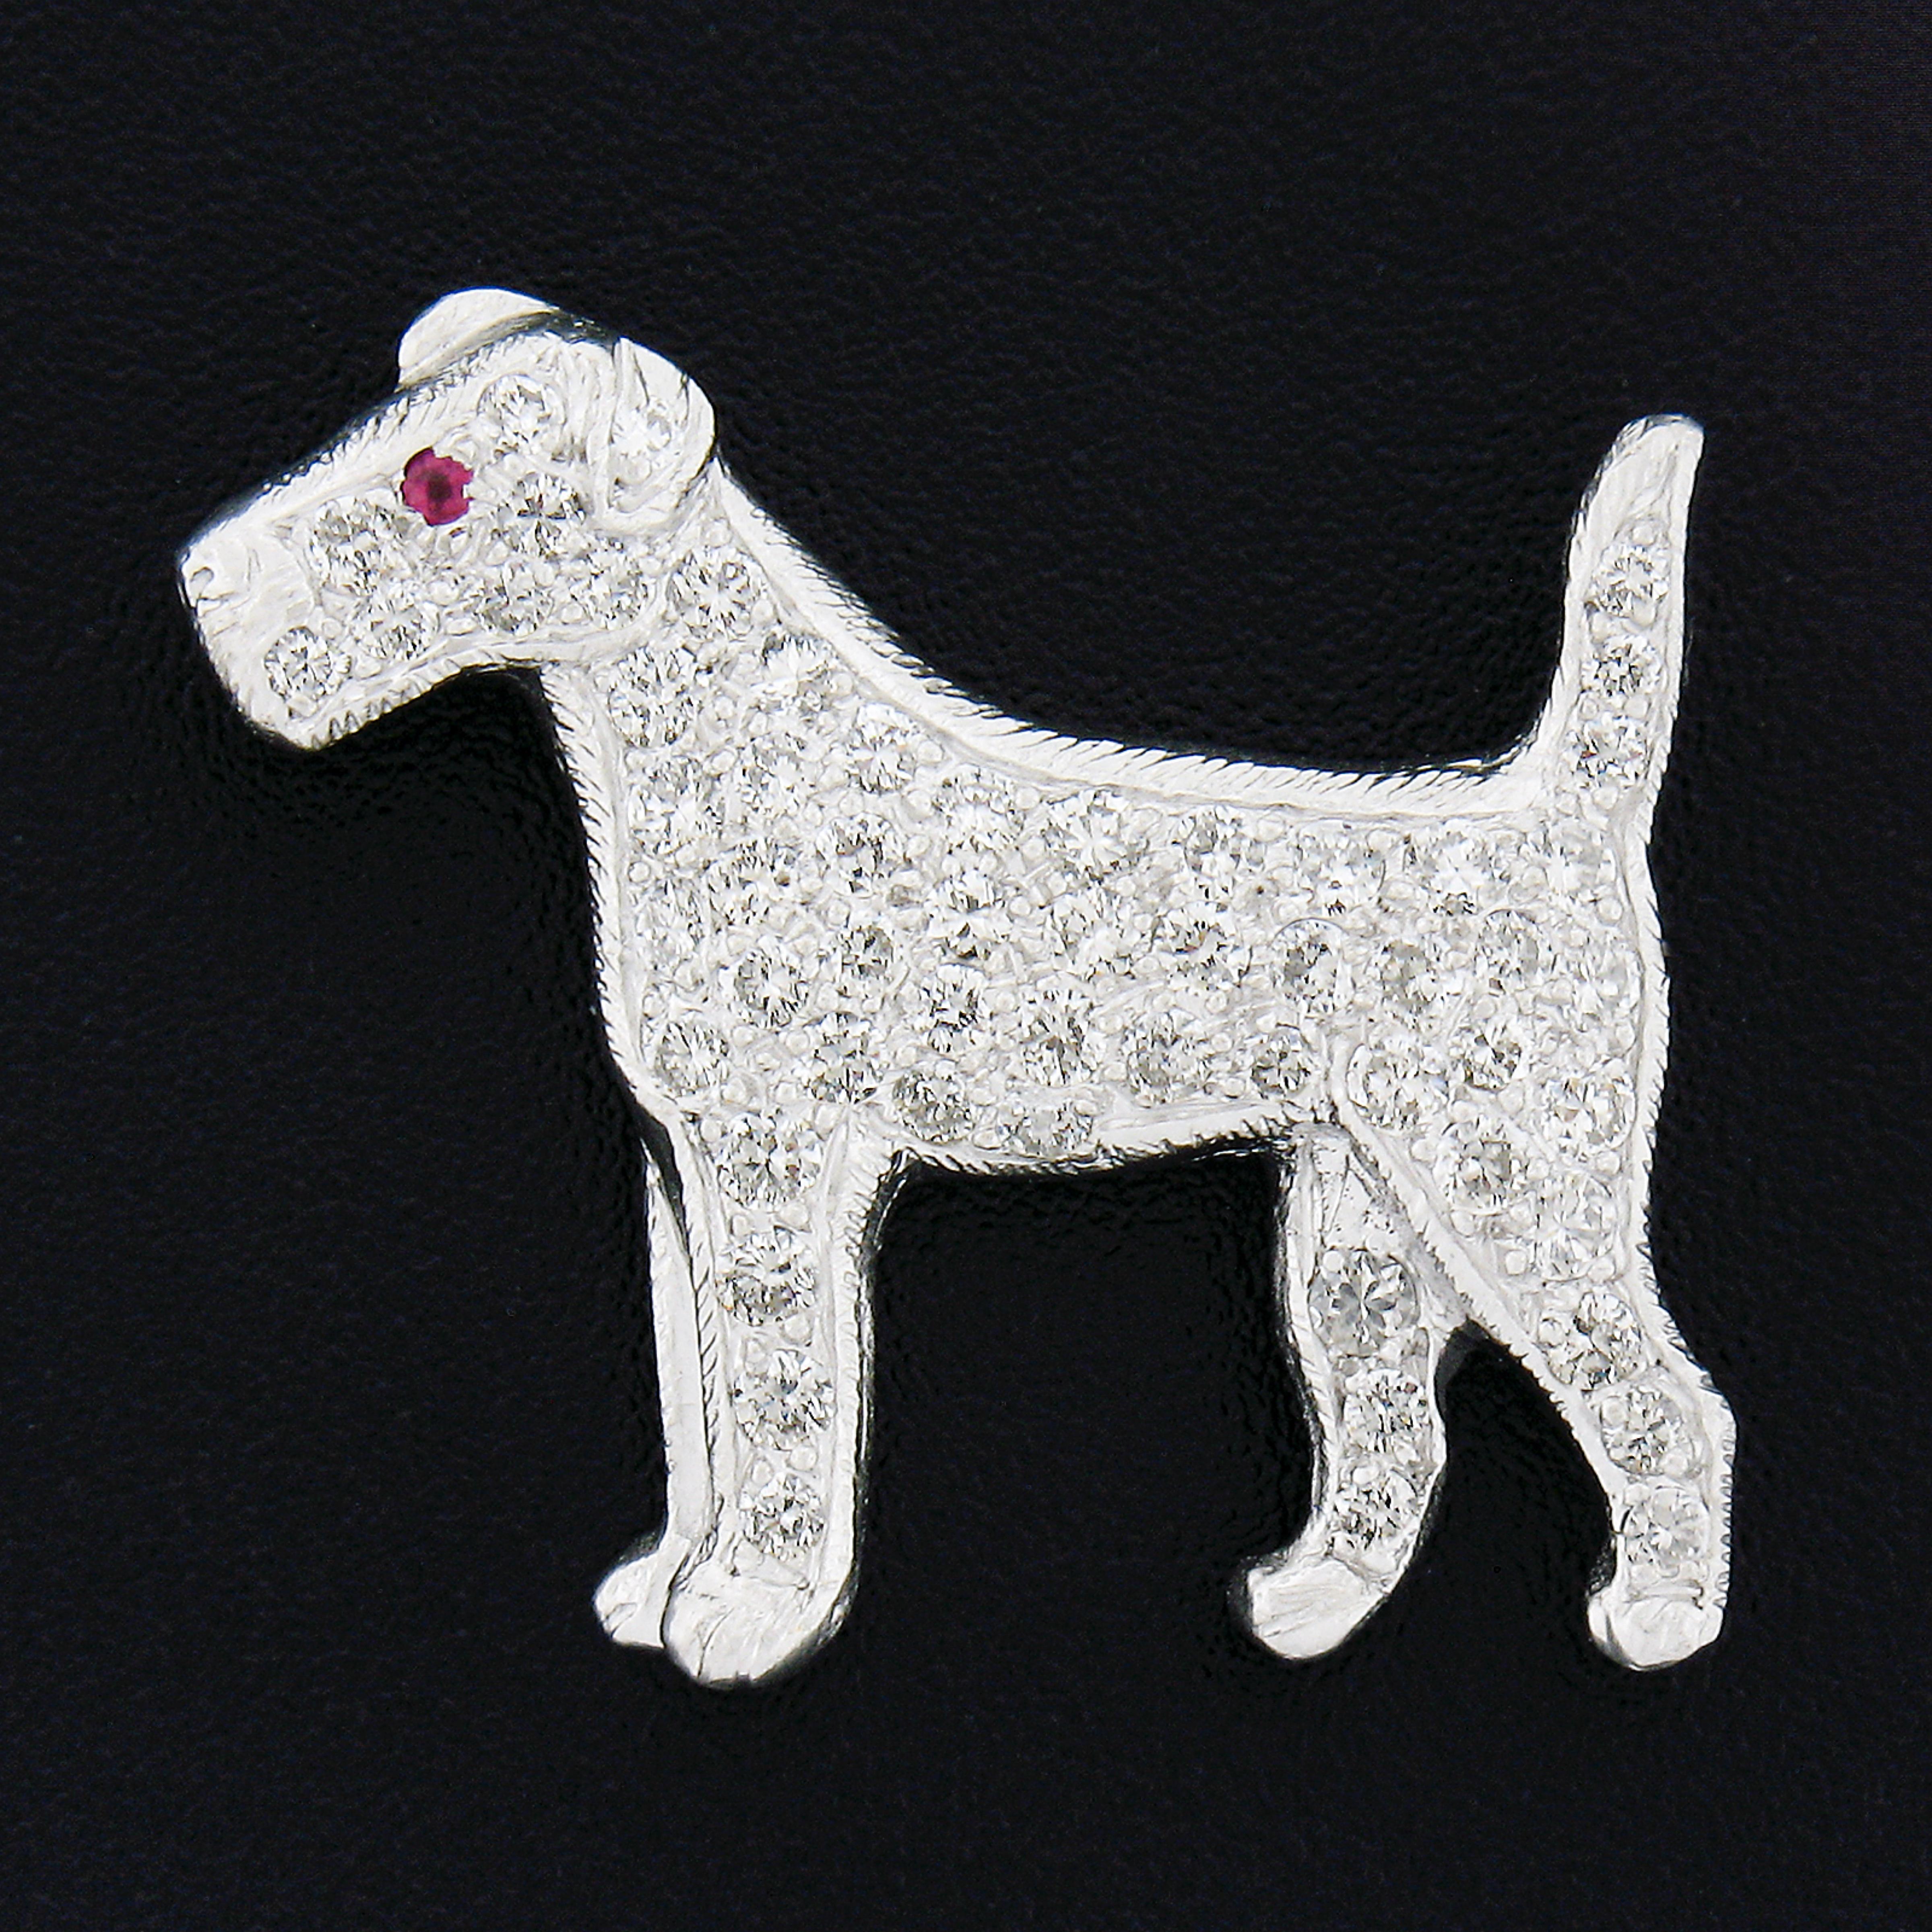 This vintage pin/brooch of an adorable Airedale dog is crafted in solid platinum and features approximately 1.25 carats of the finest quality round brilliant cut diamonds that are neatly pave set throughout its body, head, tail and legs. The